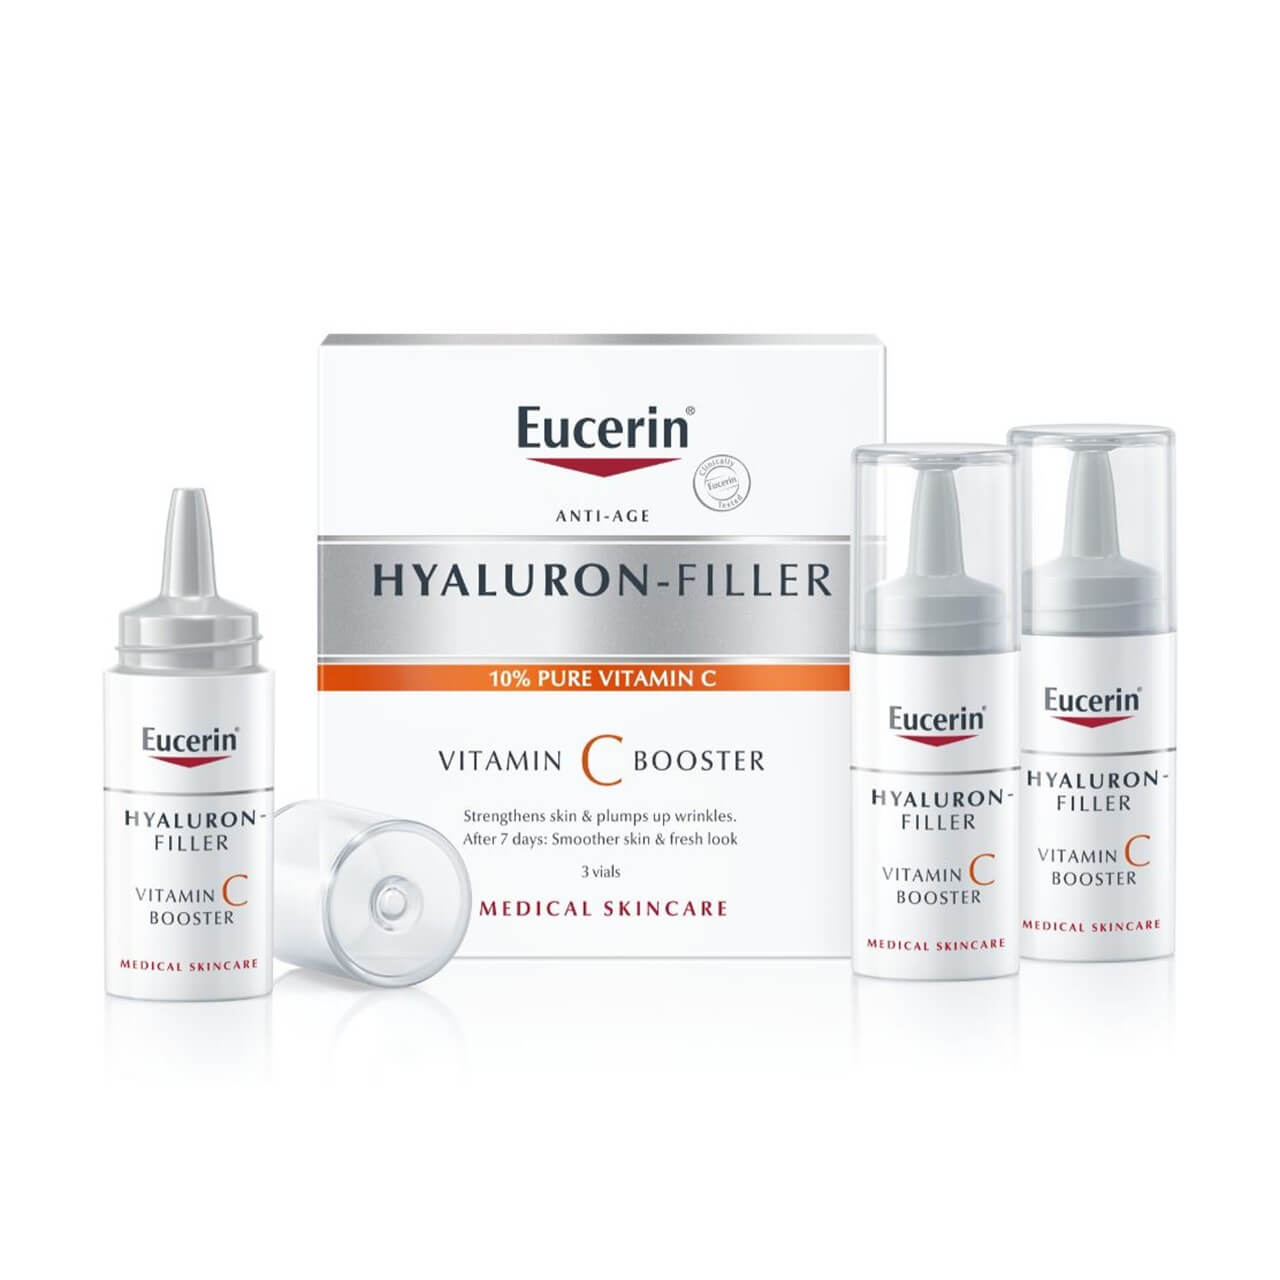 Eucerin Hyaluron-Filler Vitamin C Booster is an anti-aging serum for all skin types enriched with 10% pure vitamin C.